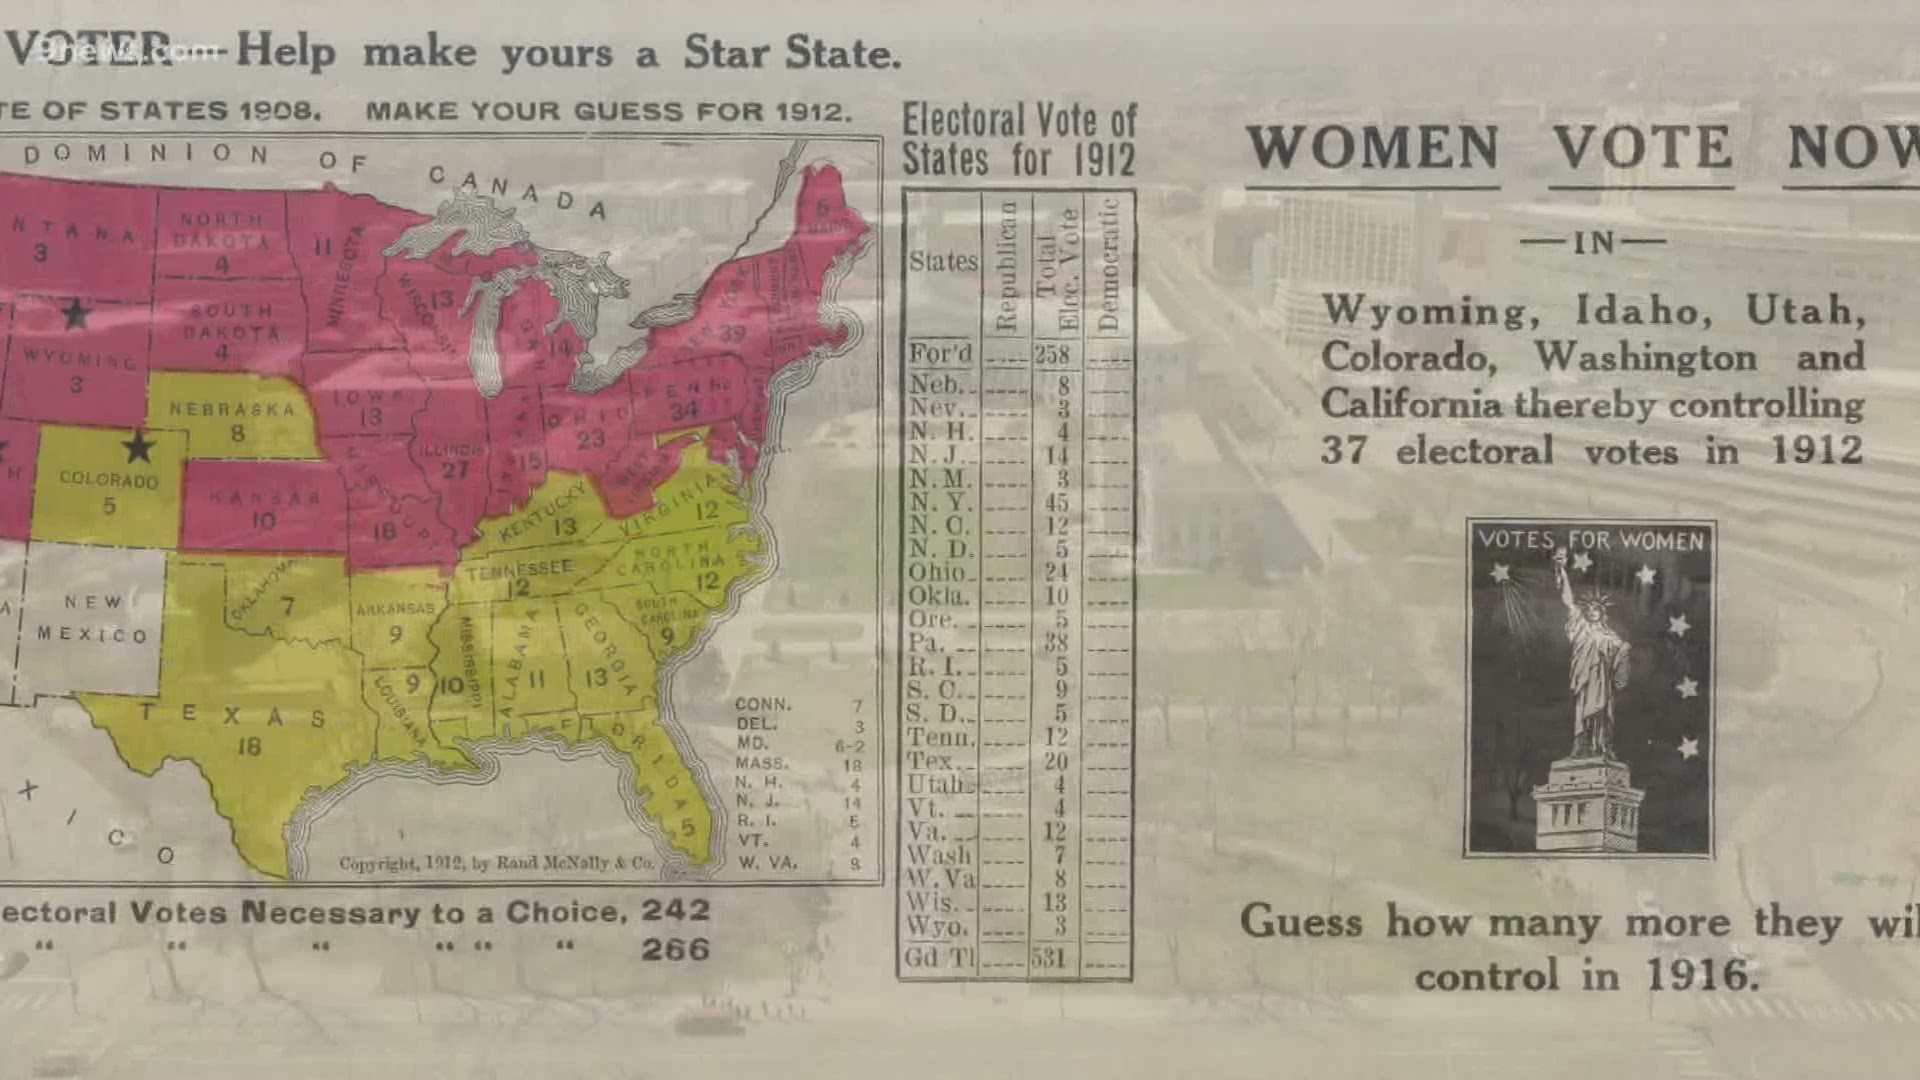 Like recreational marijuana and same-sex marriage, the Centennial State allowed women to vote long before it was legal at the federal level.